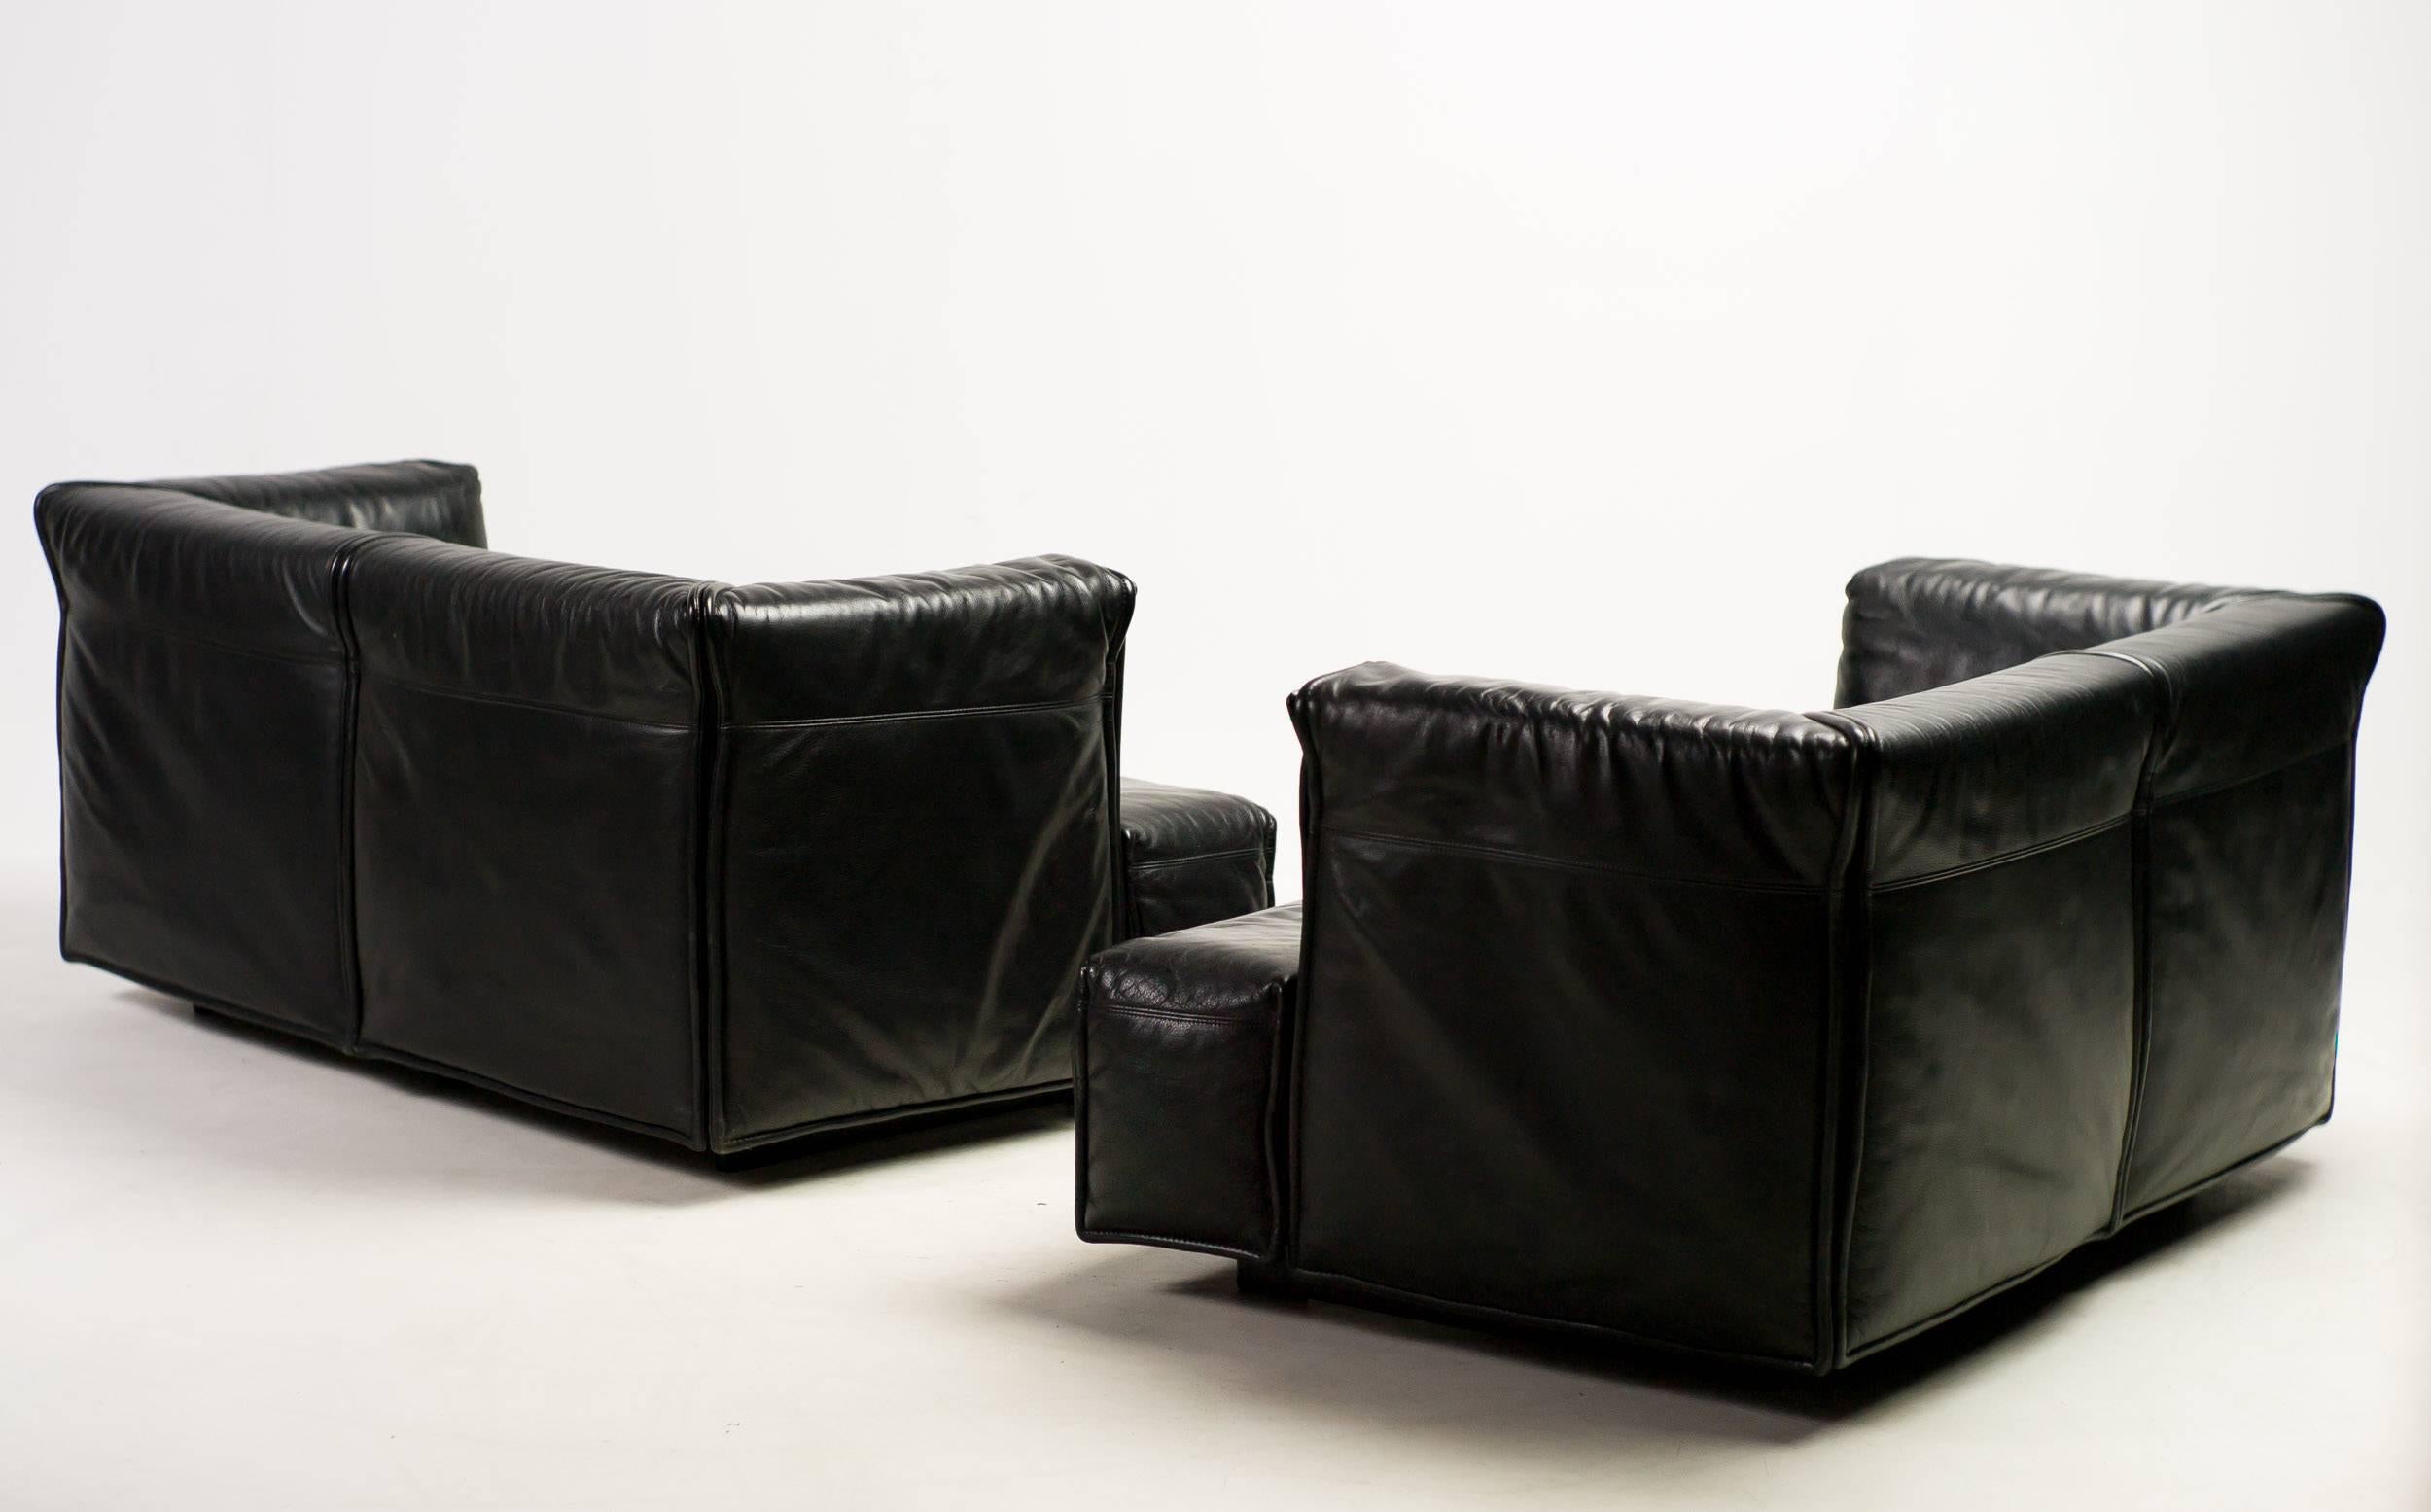 Set of two sofas in black leather, designed in 1968 by Vico Magistretti. 

Excellent fast and affordable worldwide shipping.
White glove delivery available upon request.